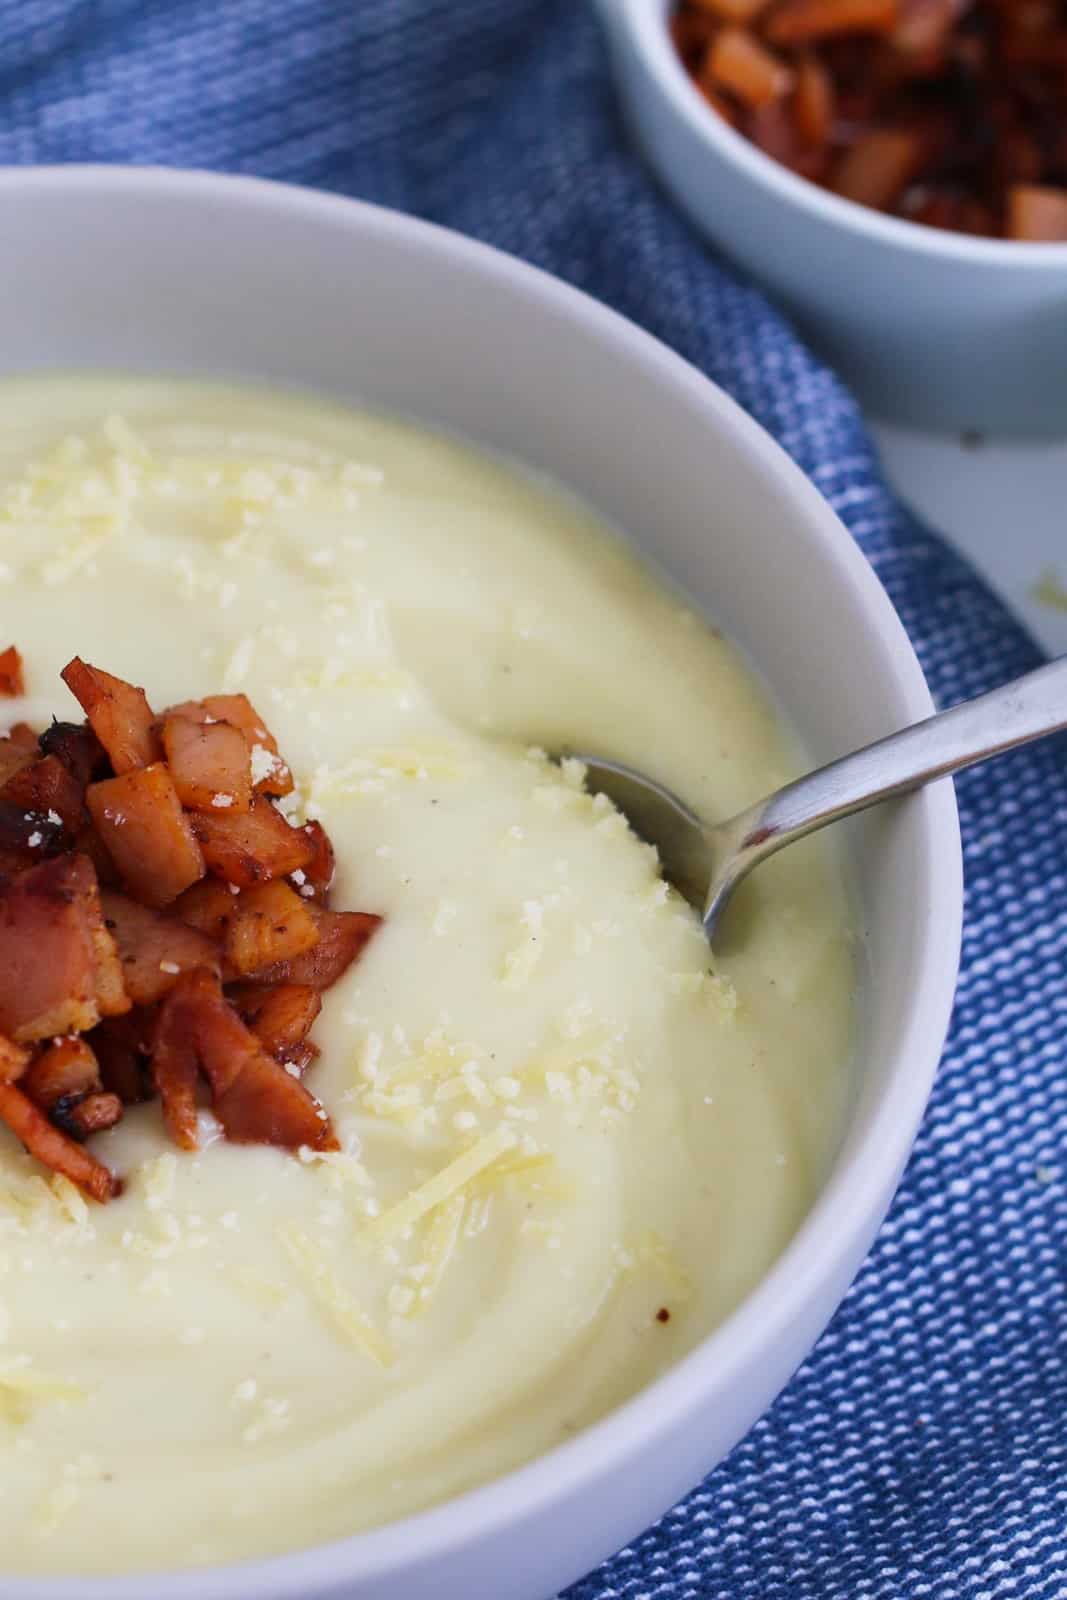 A spoon in a bowl of creamy soup with bacon.